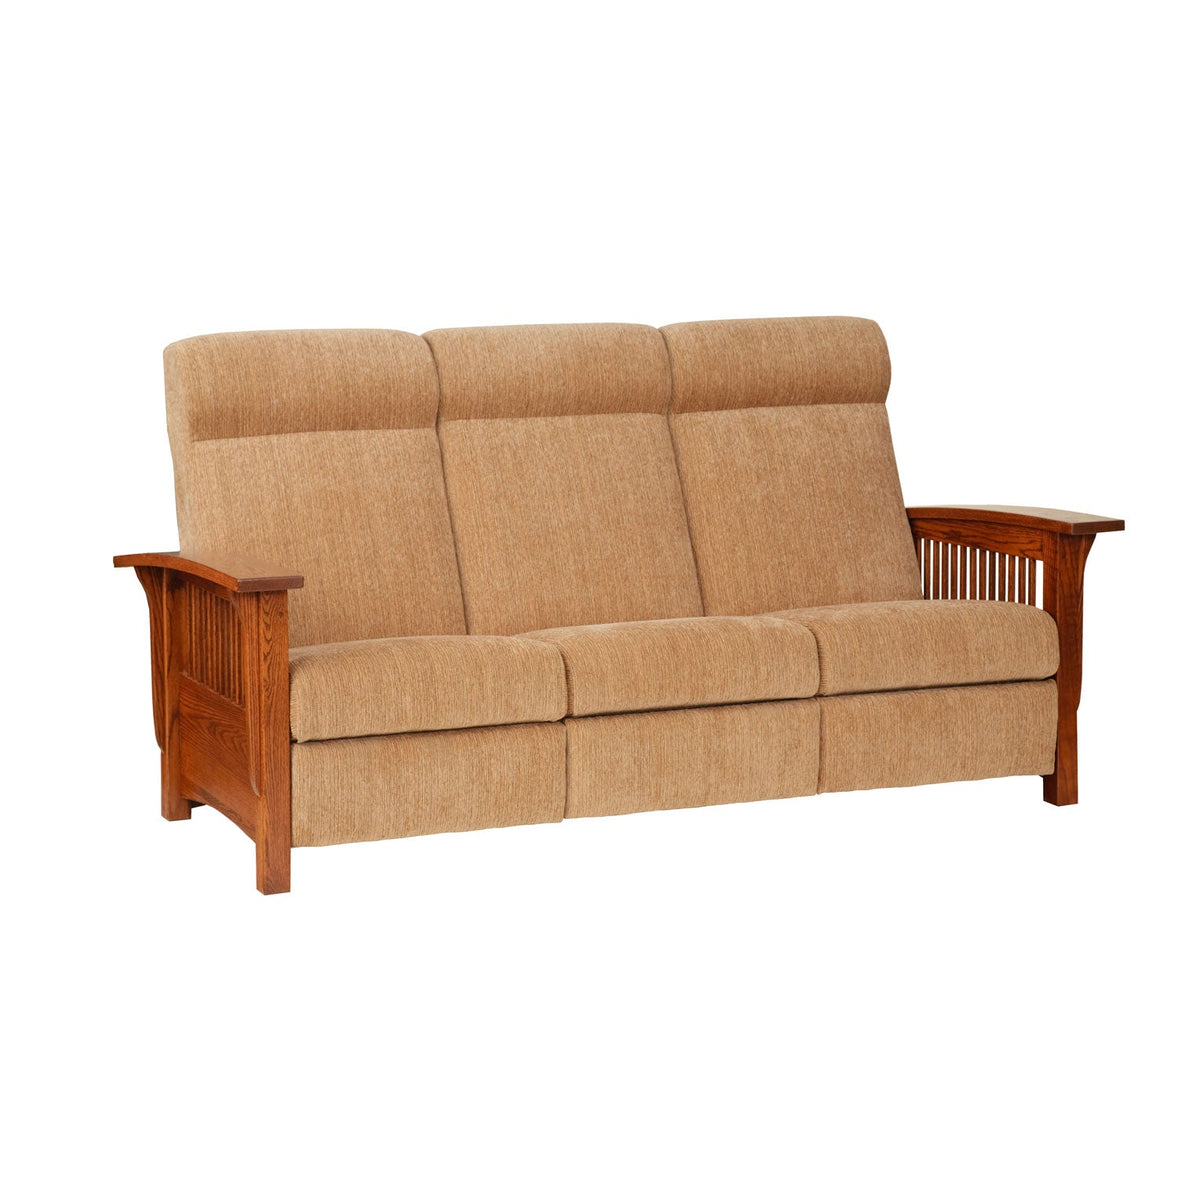 Amish Mission Solid Wood Recliner Sofa - snyders.furniture